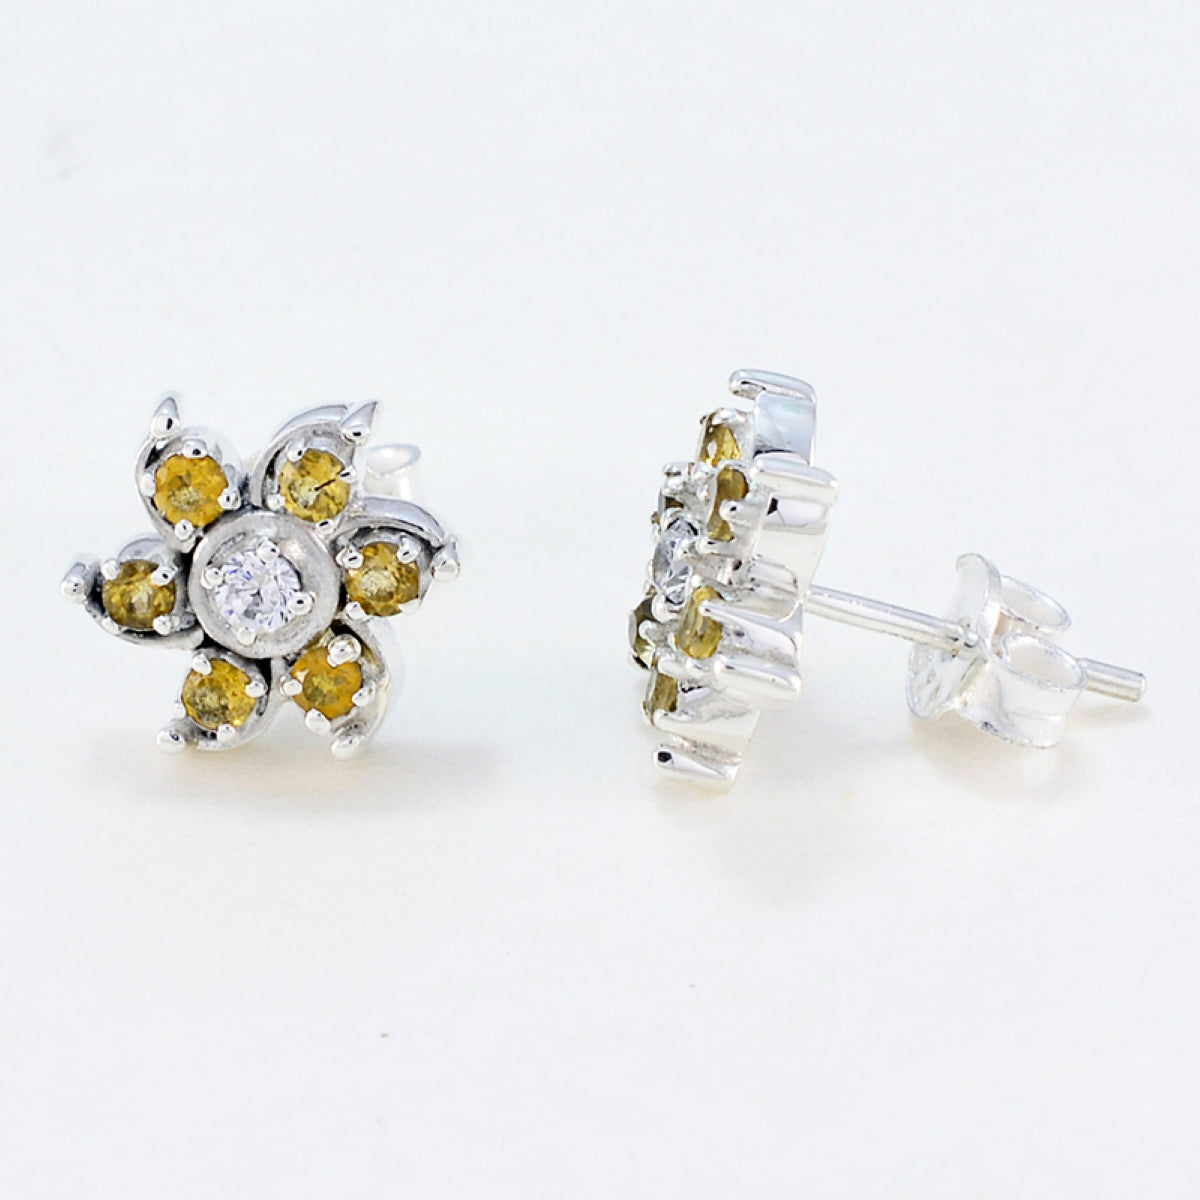 Riyo Good Gemstones round Faceted Yellow Citrine Silver Earrings easter Sunday gift